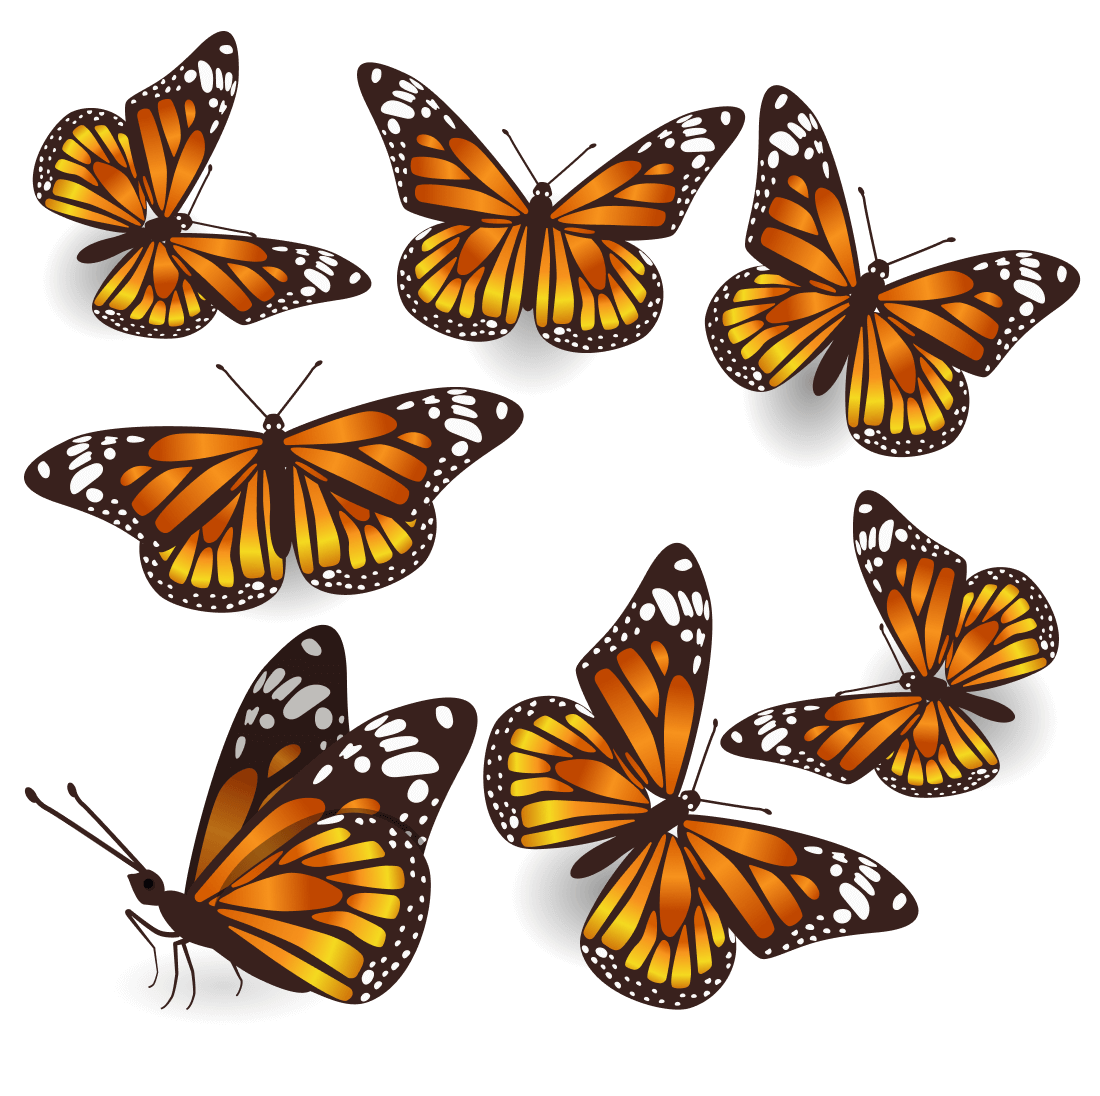 Group of orange butterflies on a white background.